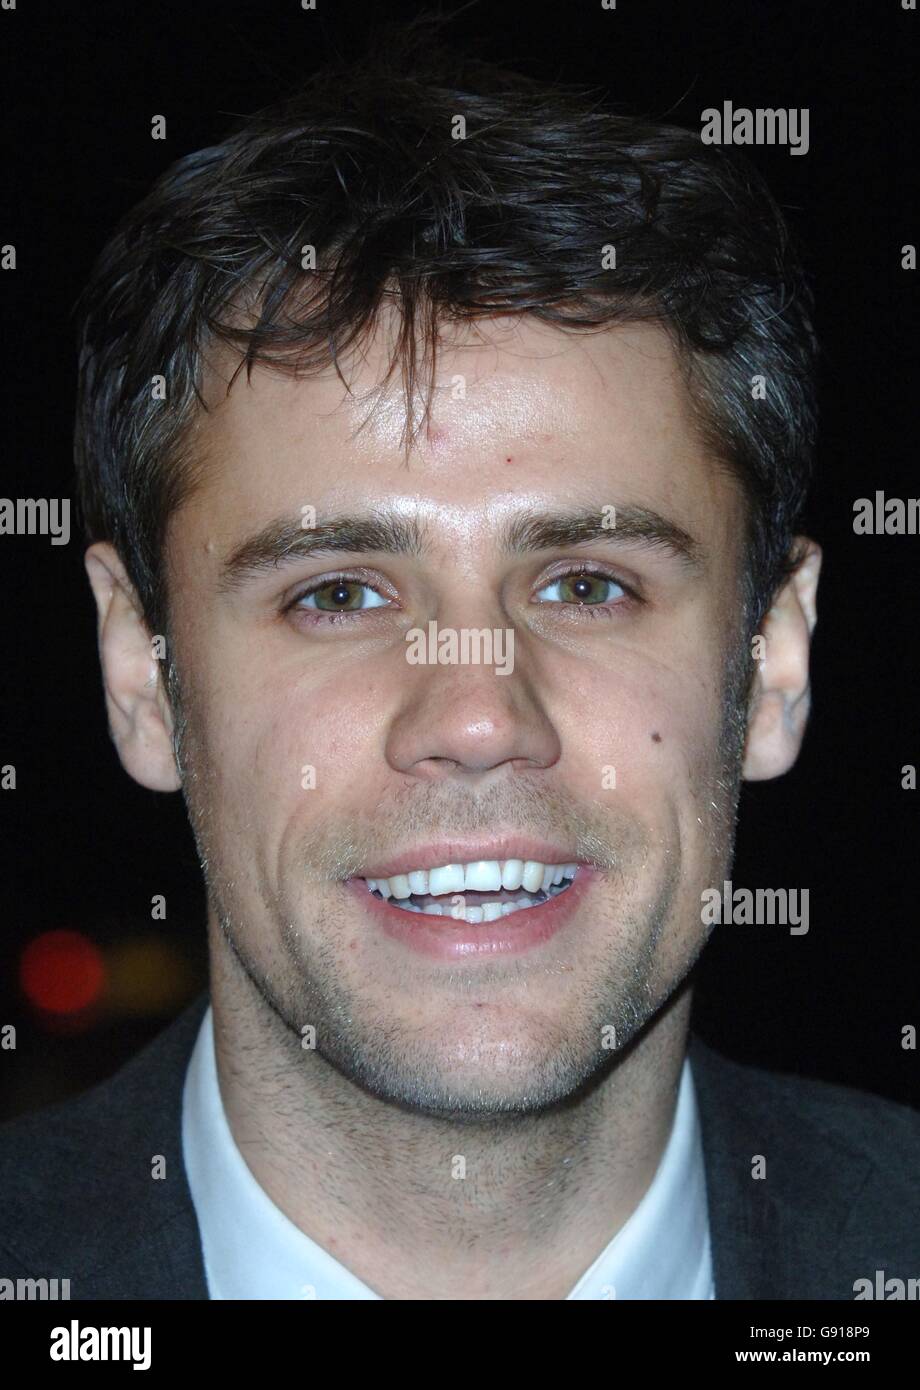 Richard Bacon arrives for the Children's Champions Awards, at the Grosvenor House Hotel, central London, Wednesday 16 November 2005. PRESS ASSOCIATION Photo. Photo credit should read: Steve Parsons/PA Stock Photo